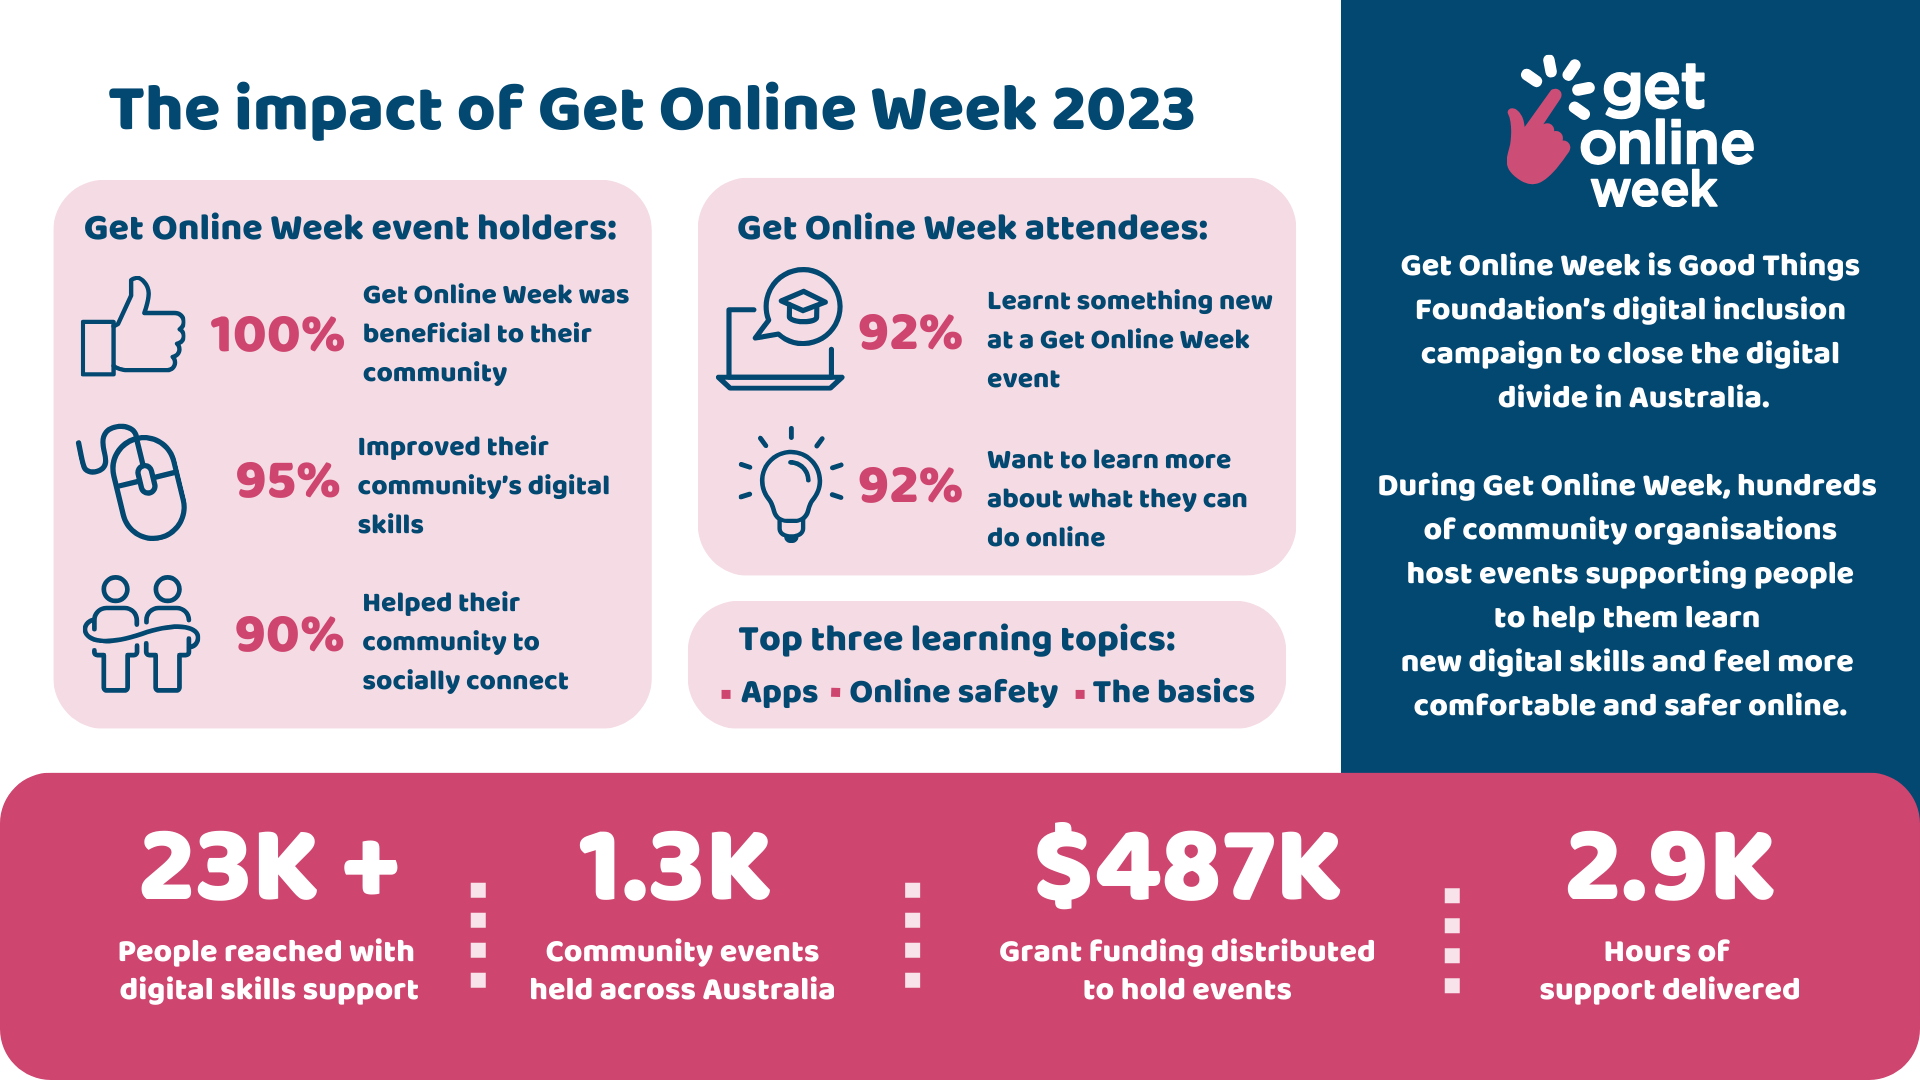 Get Online Week is Good Things Foundation’s digital inclusion campaign to close the digital divide in Australia. During Get Online Week, hundreds of community organisations host events supporting people to help them learn new digital skills and feel more comfortable and safer online. Get Online Week event holders: 100% Get Online Week was beneficial to their community 95% Improved their community’s digital skills 90% Helped their community to socially connect Get Online Week event attendees: 92% Learnt something new at a Get Online Week event 92% Want to learn more about what they can do online Top three learning topics: Apps Online Safety The basics 23K + People reached with digital skills support 1.3K Community events held across Australia $487K Grant funding distributed to hold events 2.9K Hours of support delivered